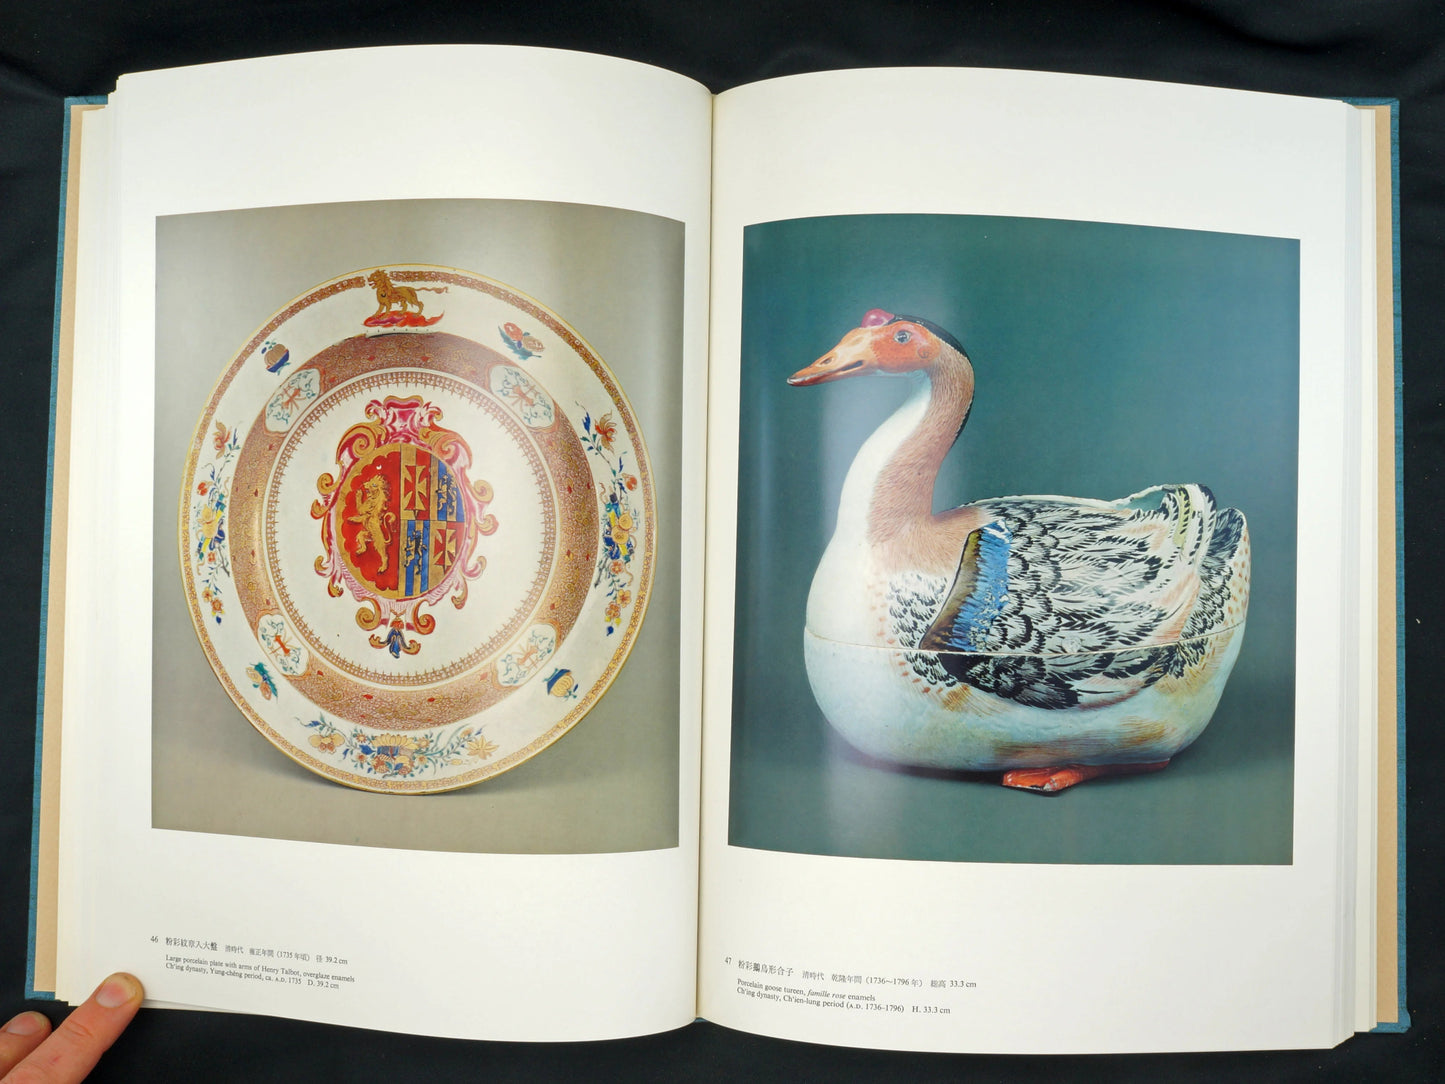 Oriental Ceramics; Worlds Great Collections-Vol. 5 British Museum - Bear and Raven Antiques